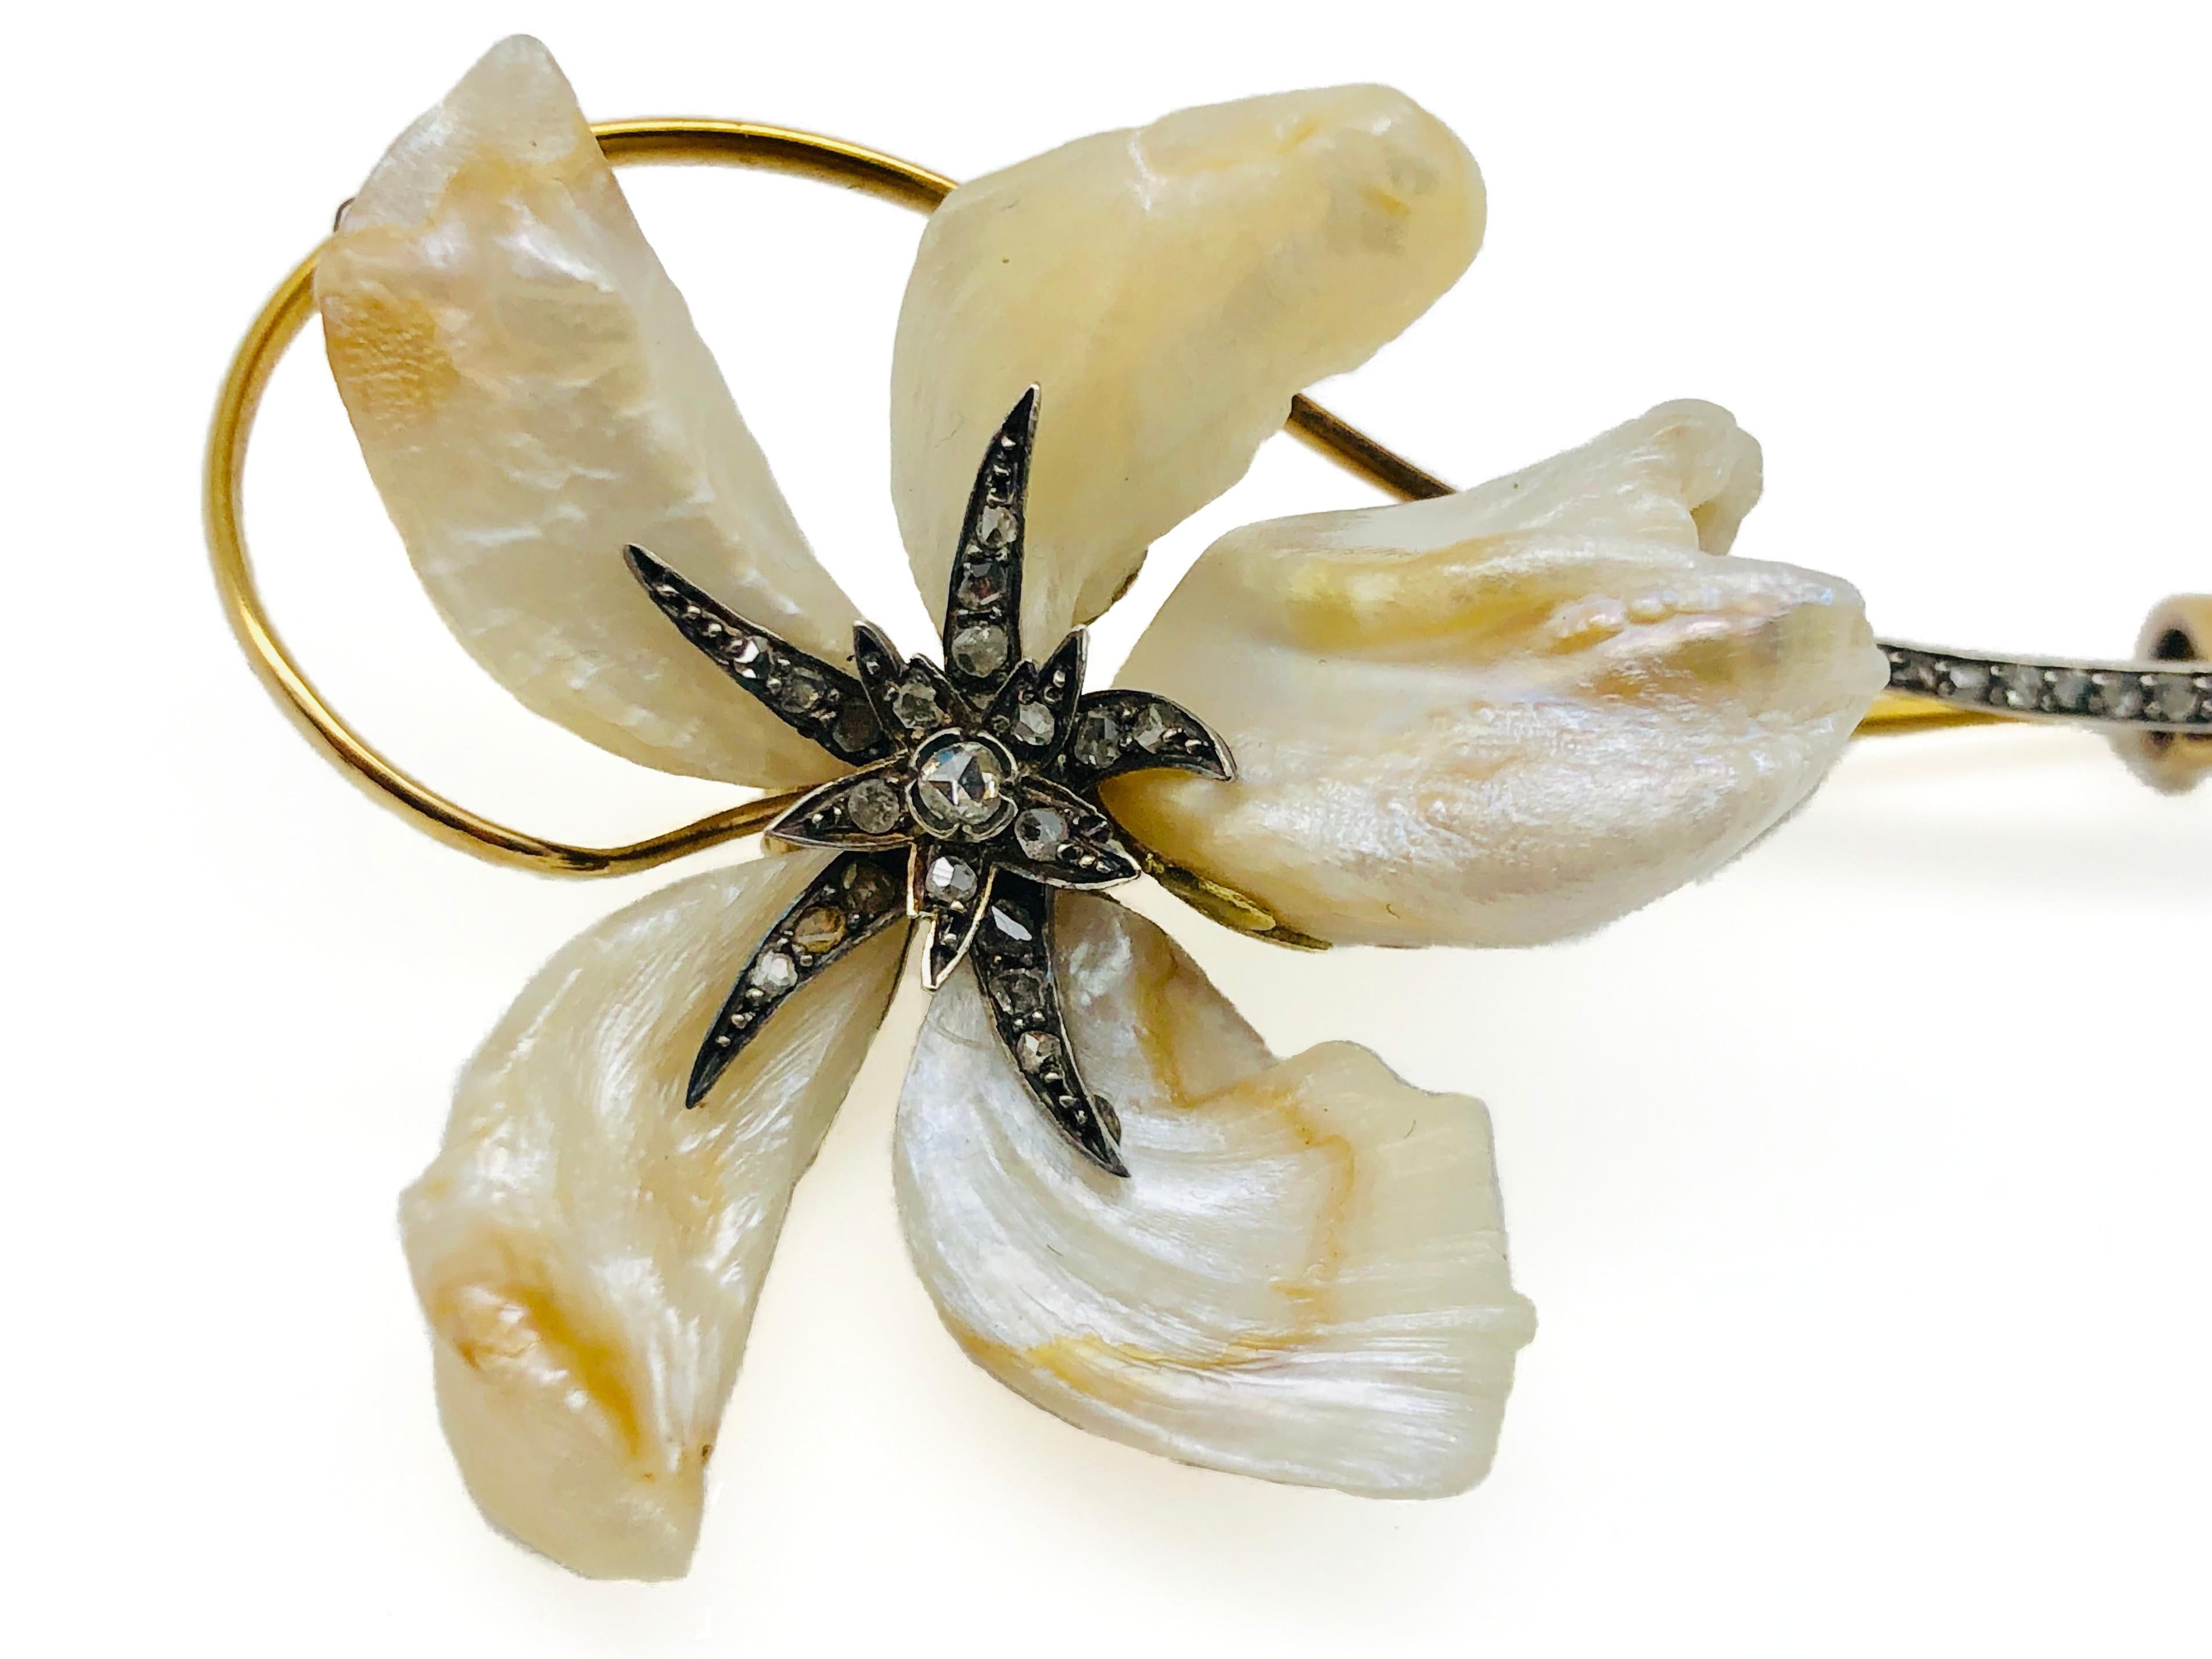 Beautifully designed Art Nouveau flower brooch. Five natural baroque pearls have been transformed into flower petals and mounted on gold. The center of the flower is made out of silver and set with old cut diamonds. The golden flower stem terminates